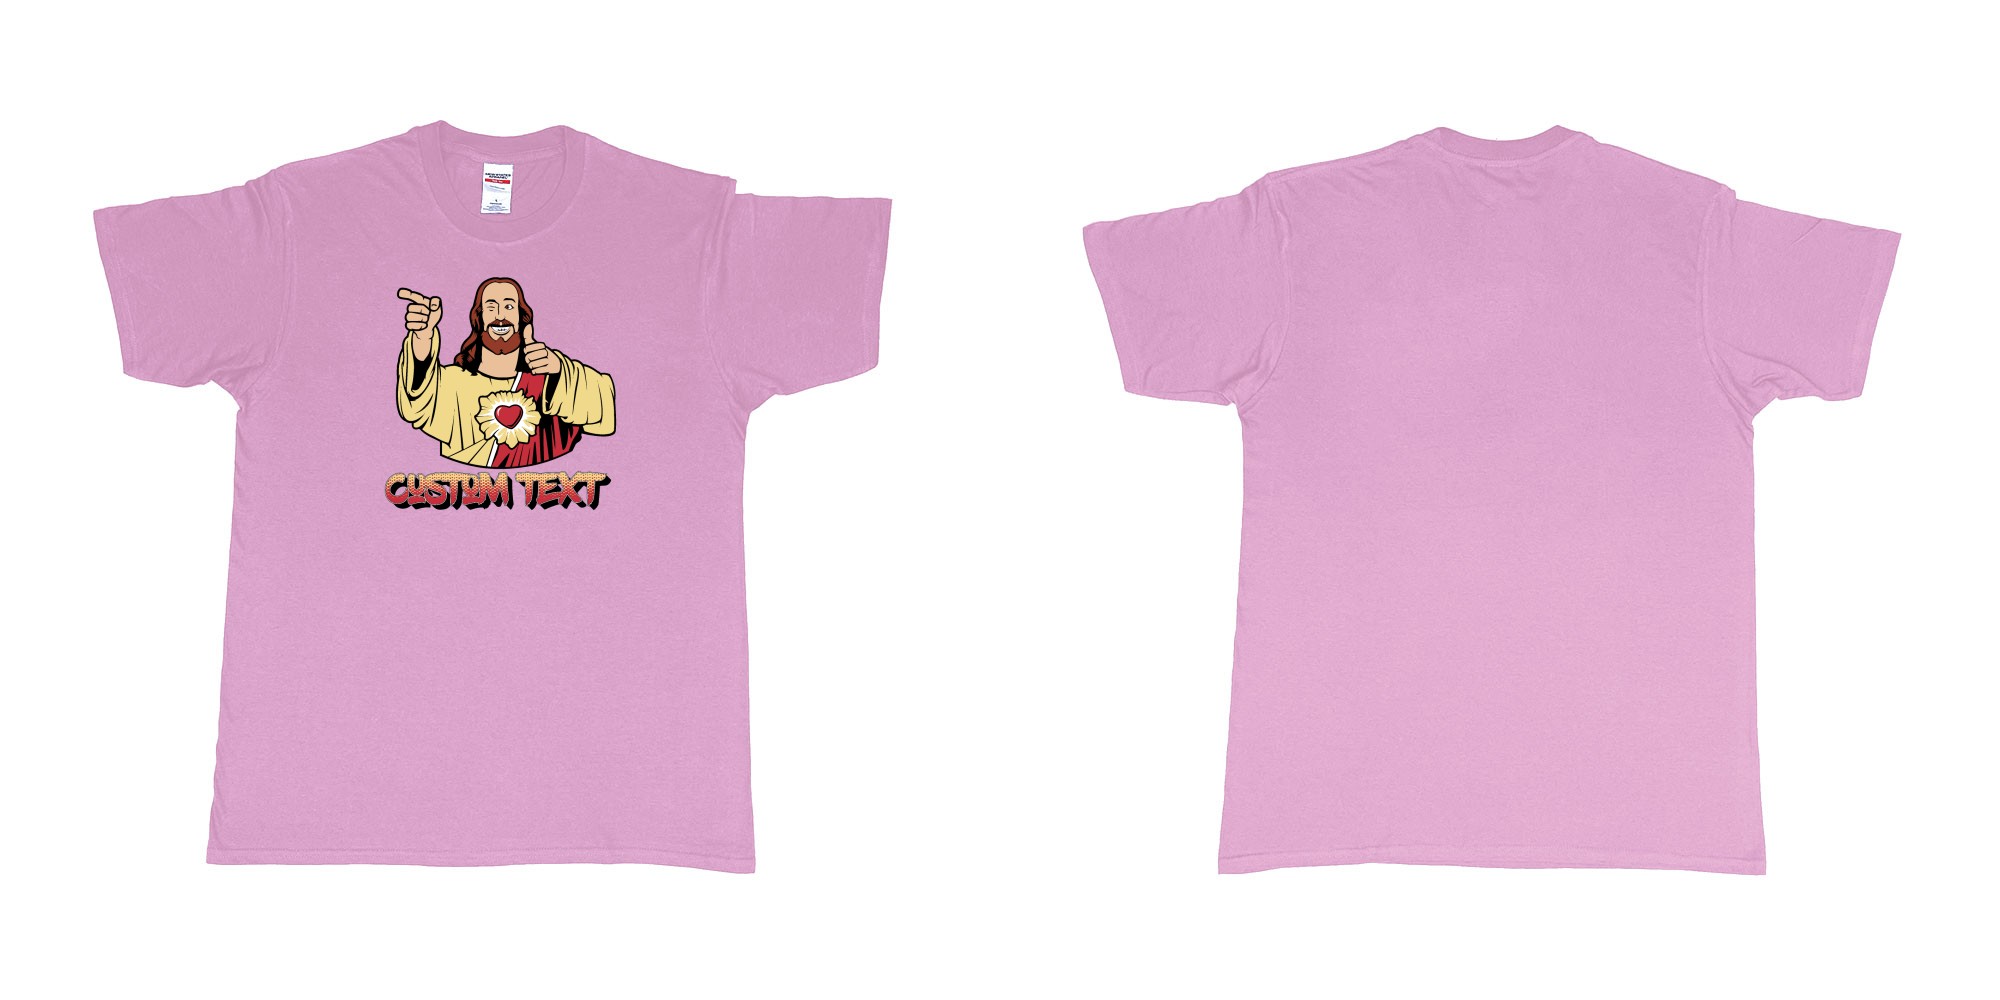 Custom tshirt design buddy christ custom text in fabric color light-pink choice your own text made in Bali by The Pirate Way